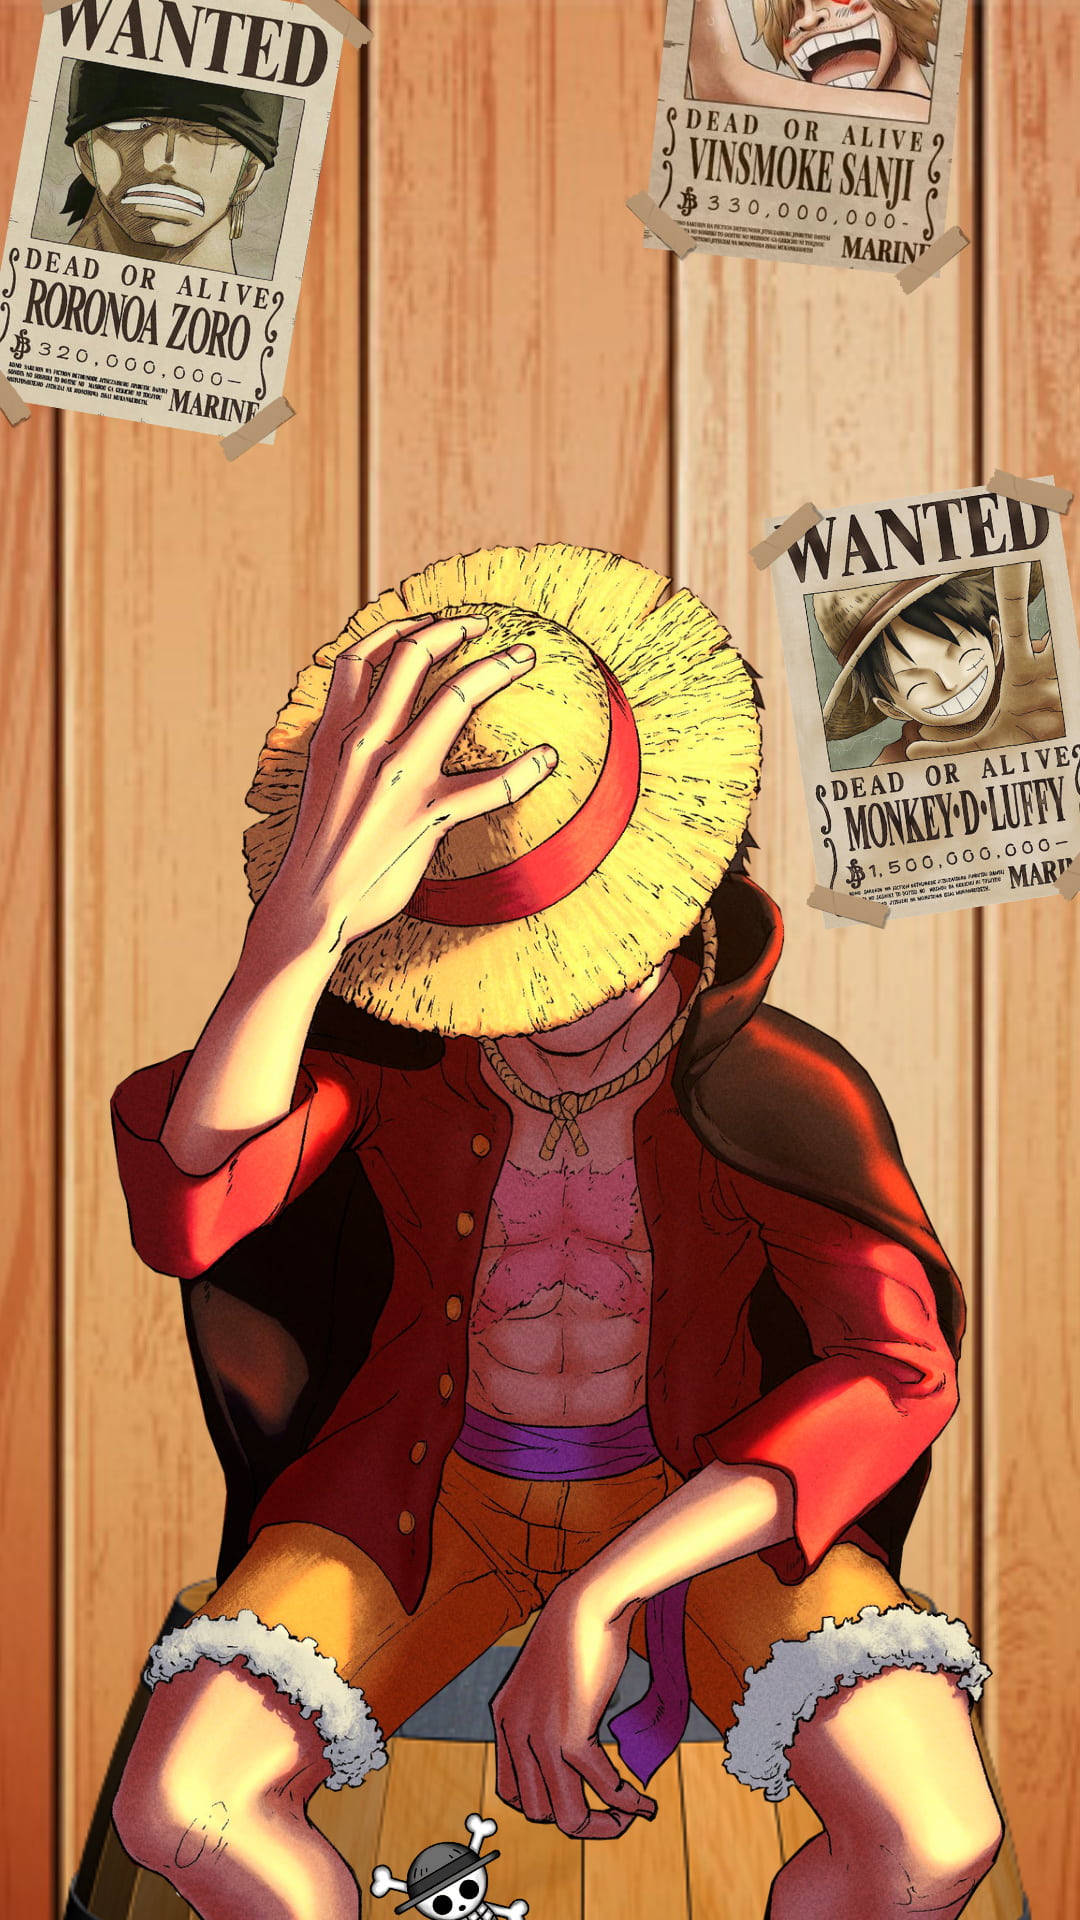 Mysterious Wanted One Piece Luffy Pfp Fanart Background